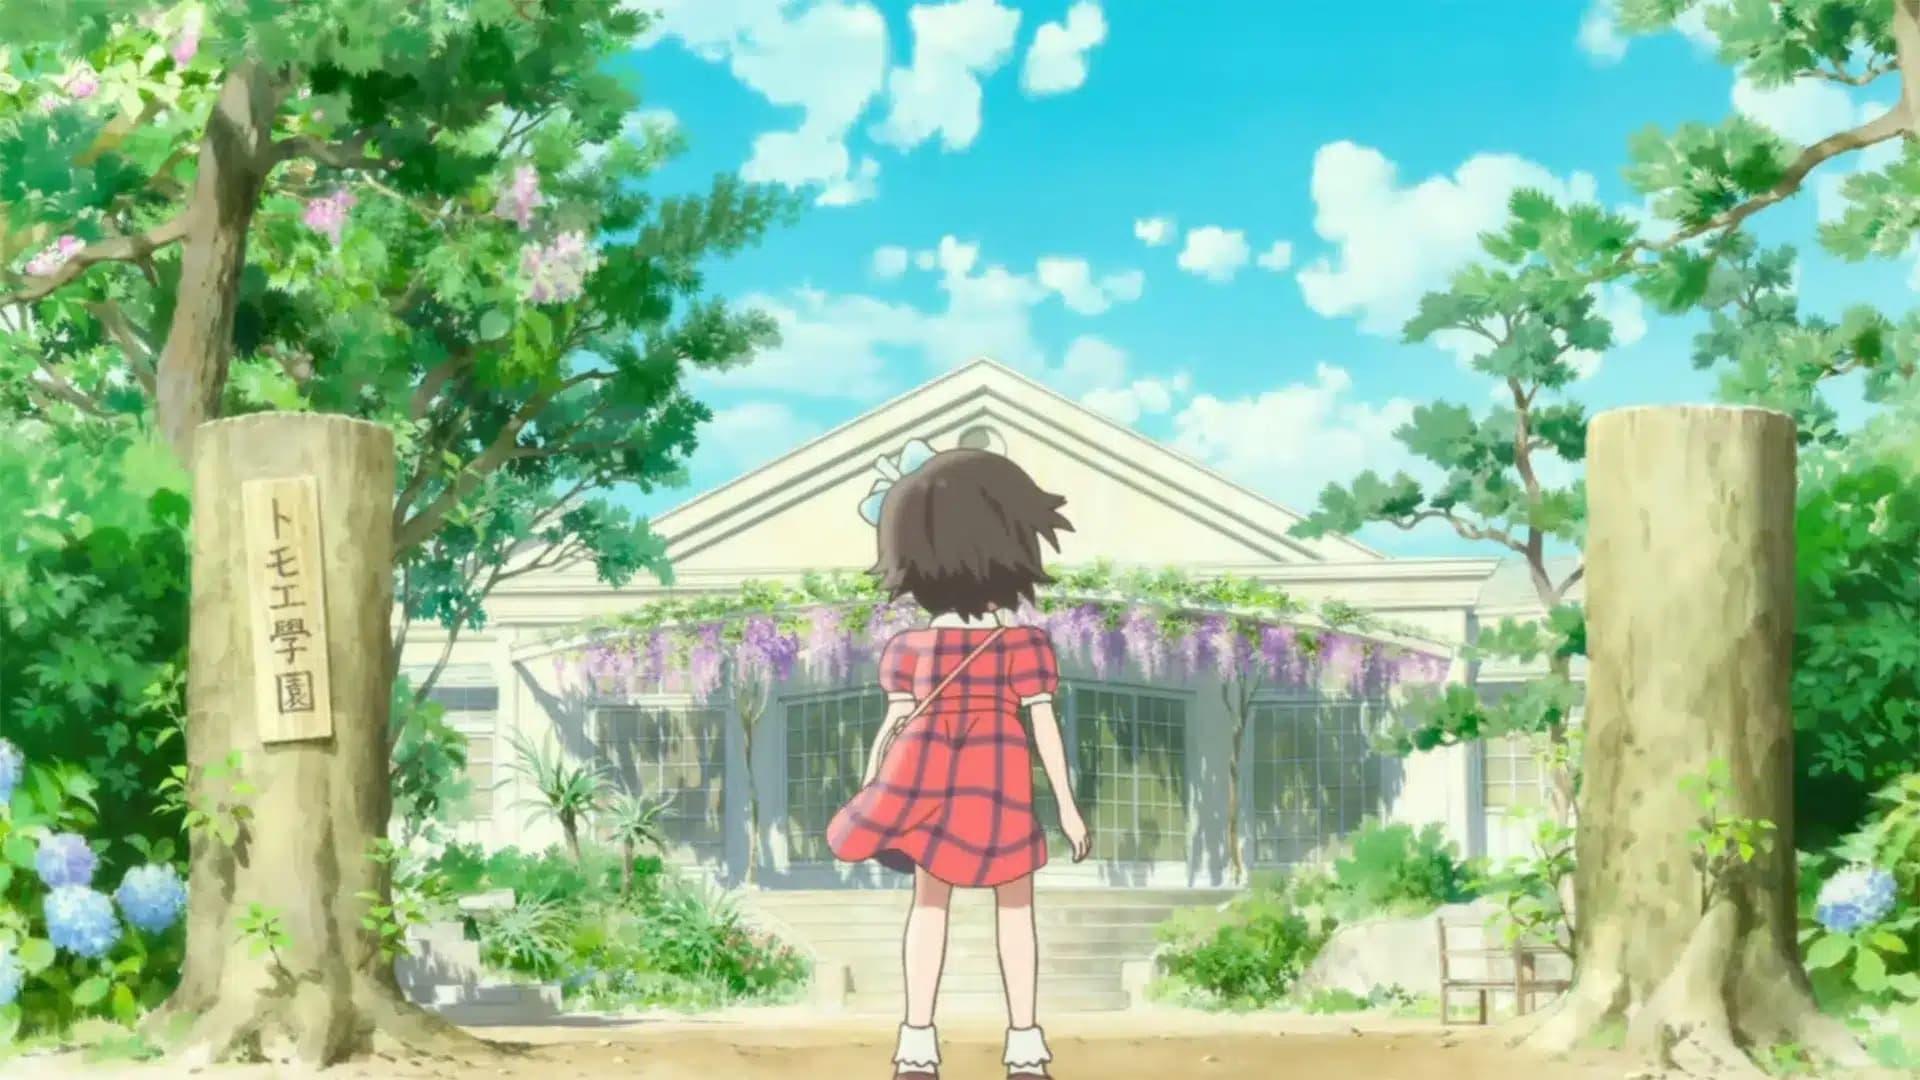 Totto-chan: The Little Girl at the Window backdrop